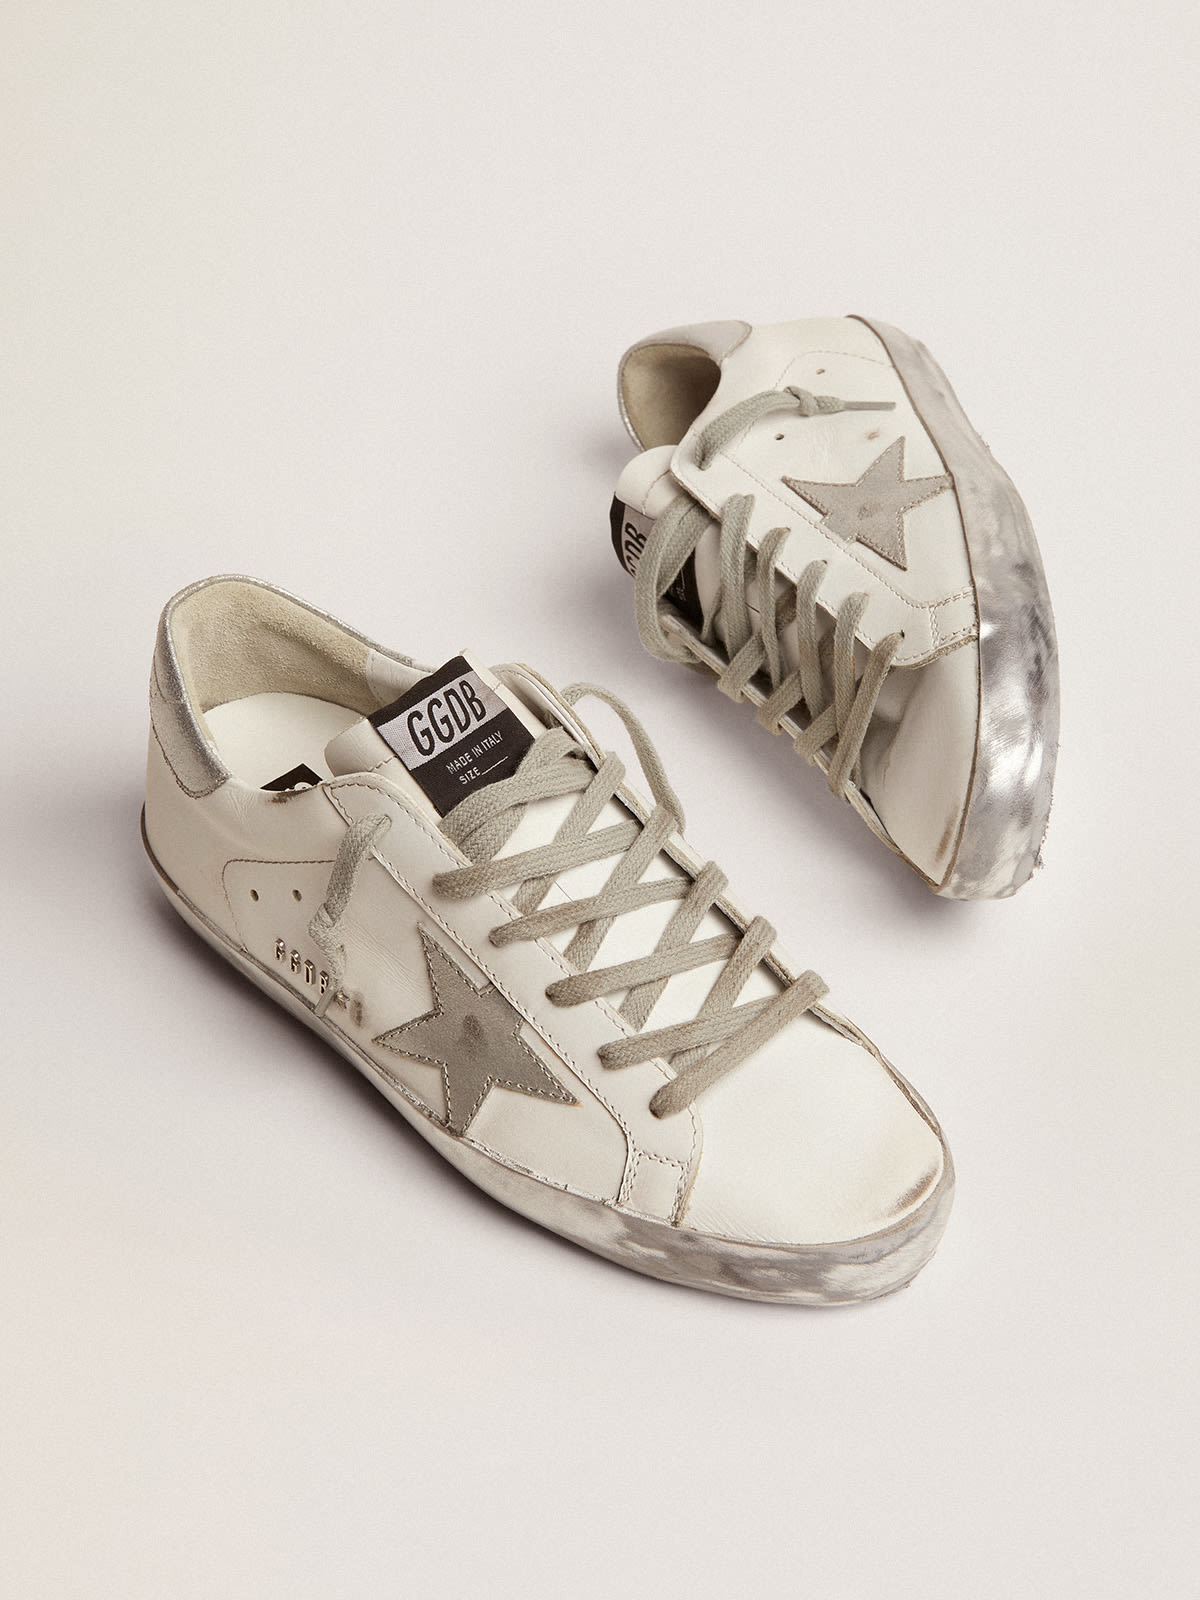 Golden Goose - Super-Star Donna con foxing sparkle argento e metal studs lettering in 